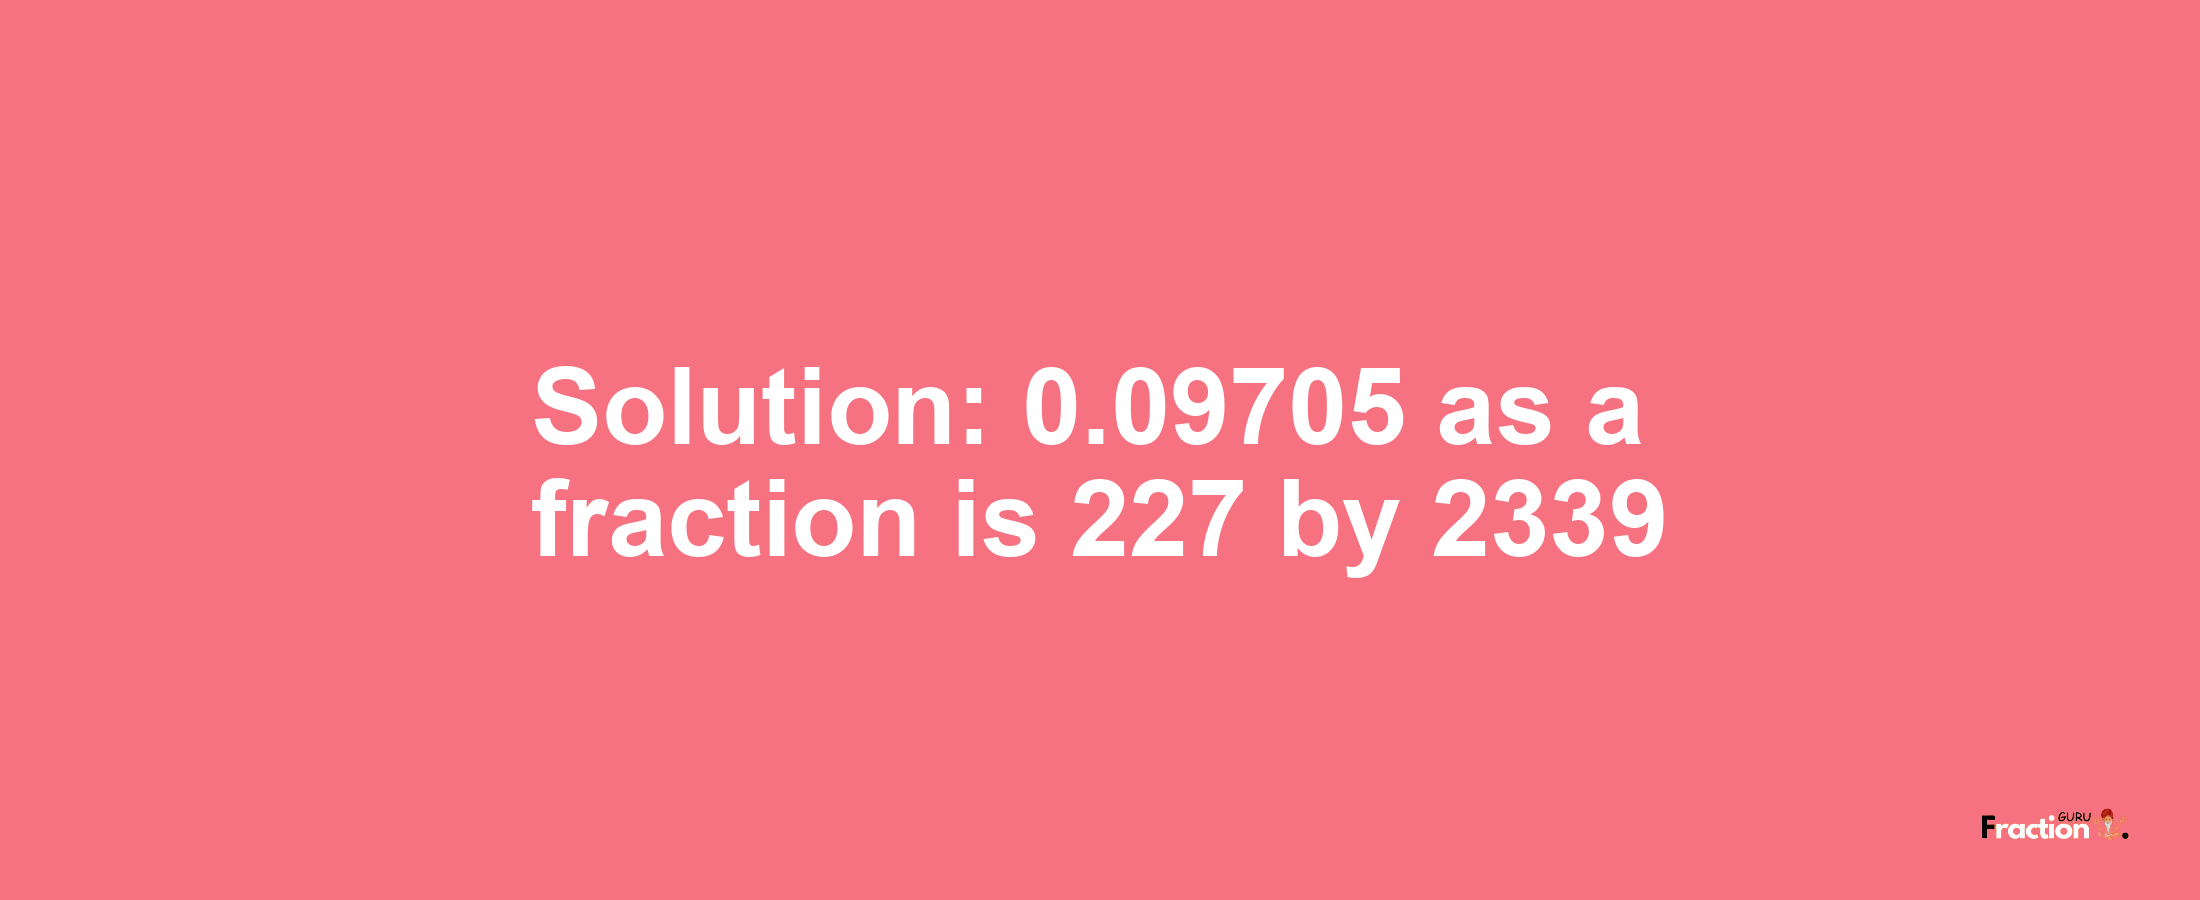 Solution:0.09705 as a fraction is 227/2339